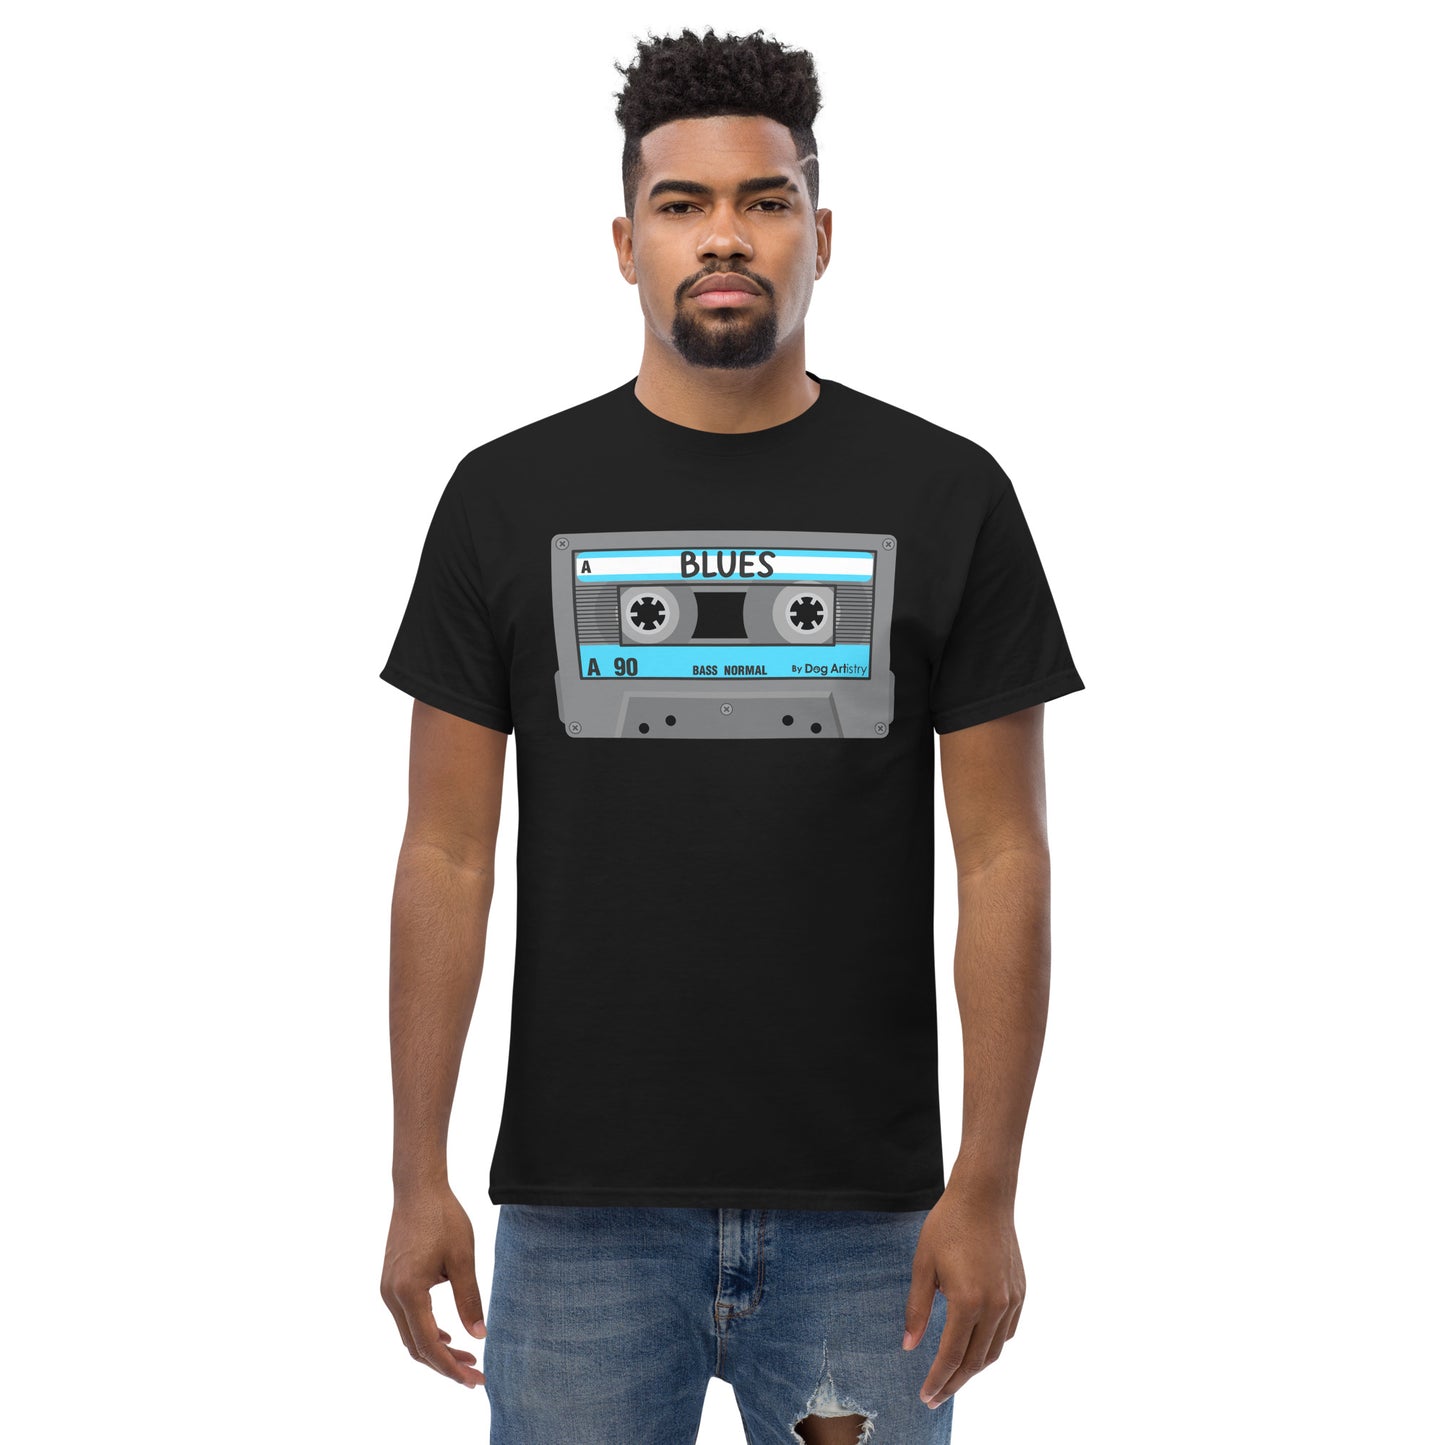 Blues Cassette Tape Men's classic tee by Dog Artistry